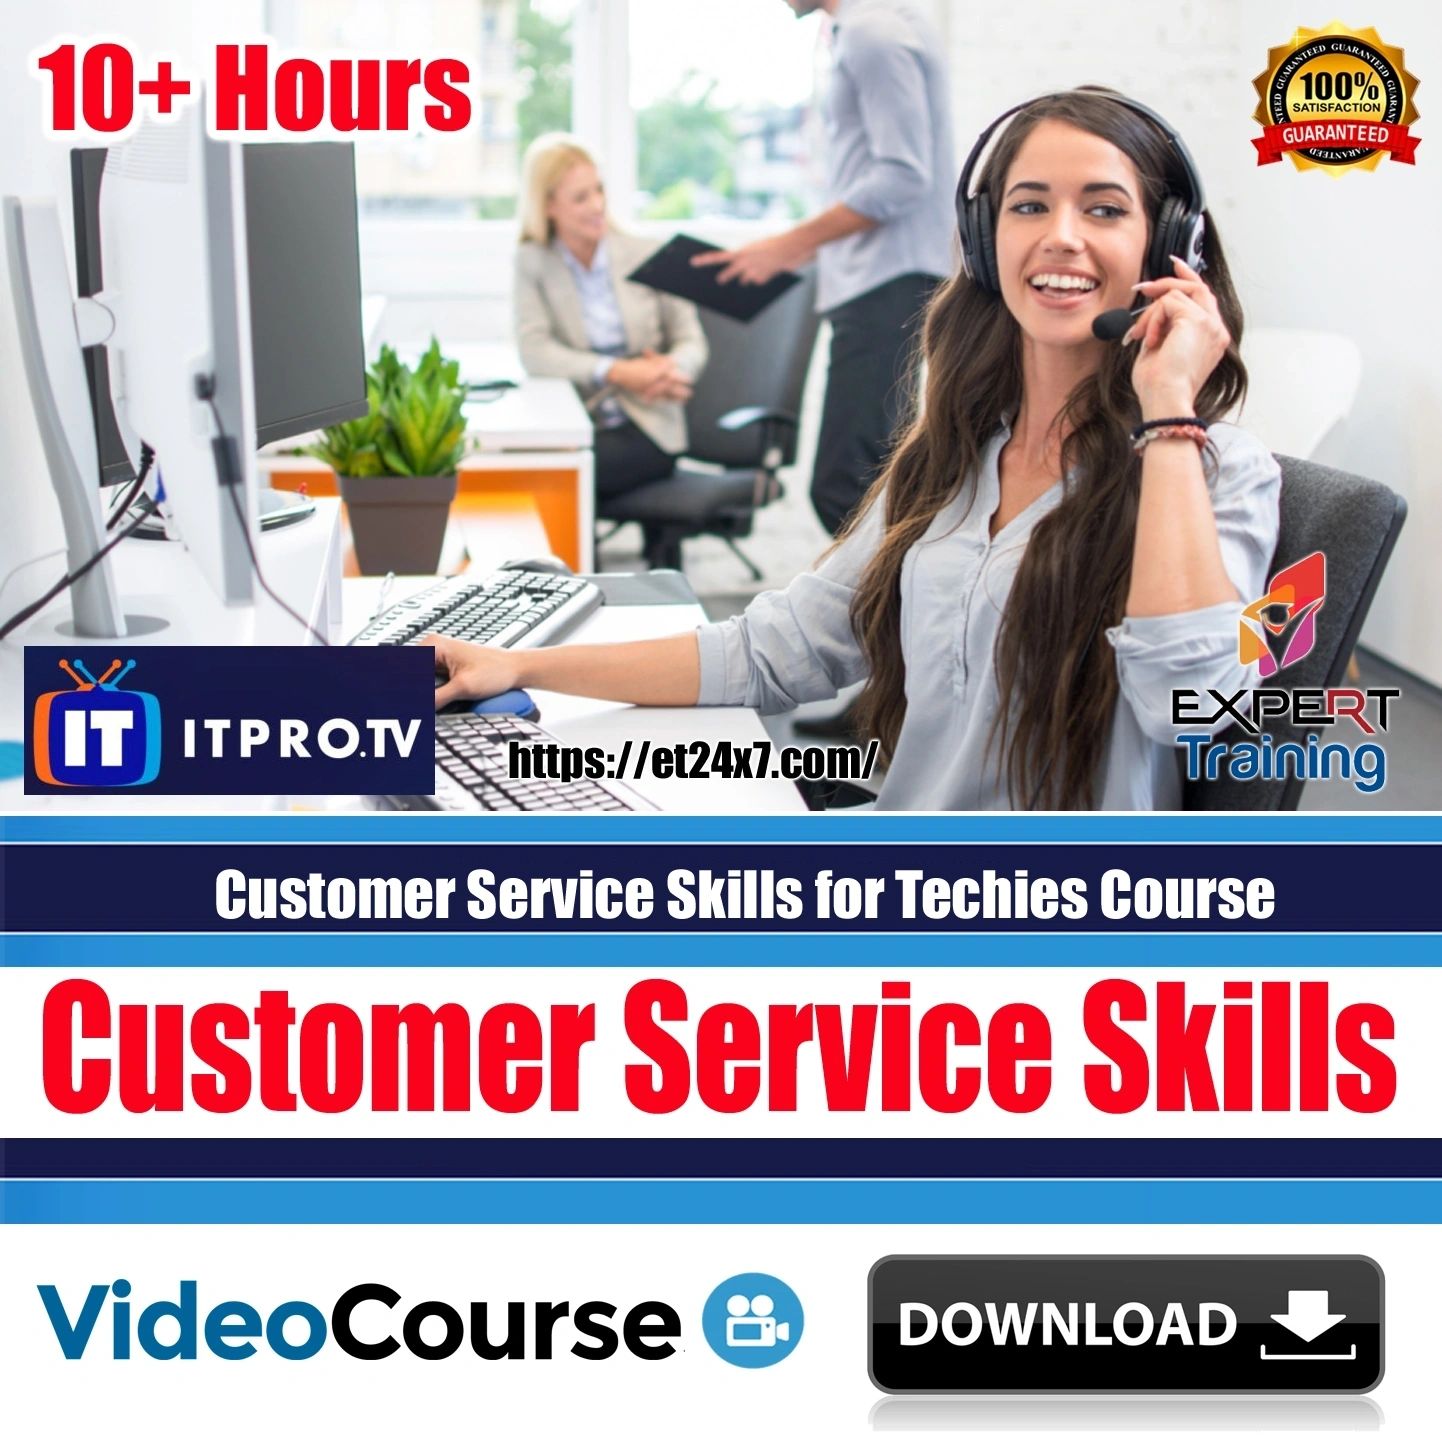 Customer Service Skills for Techies Course